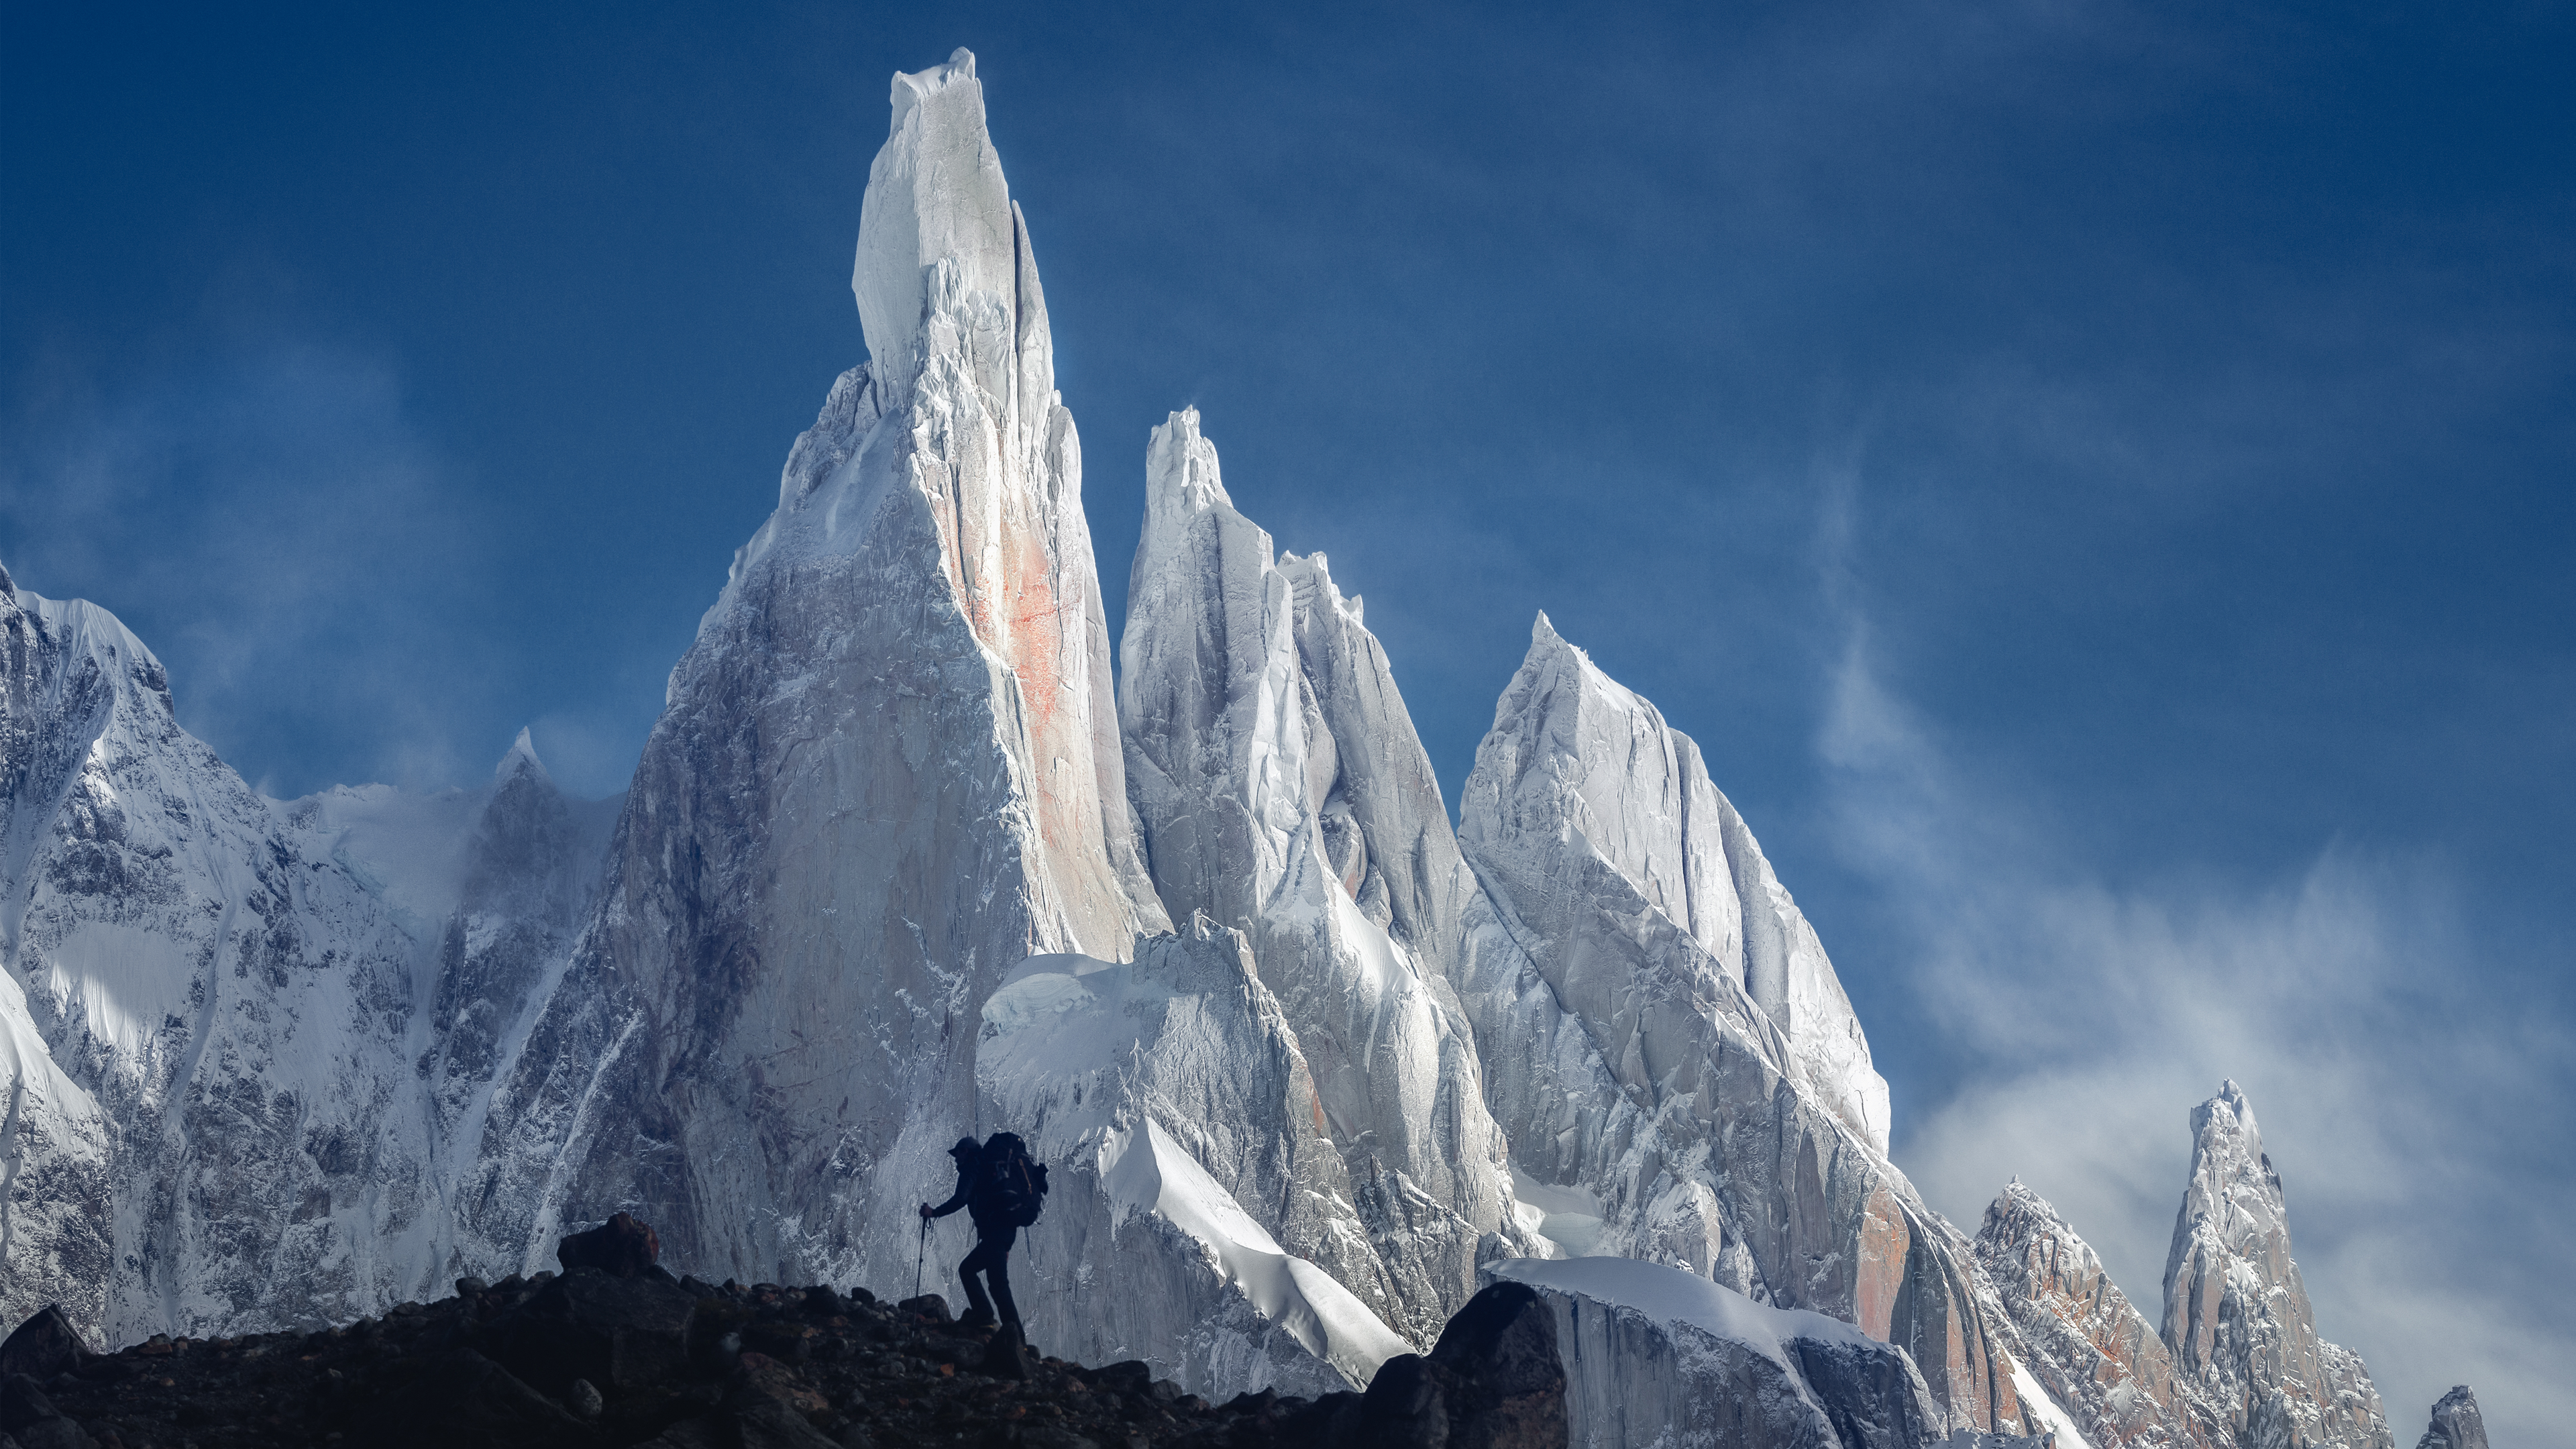 General 3840x2160 Argentina Cerro Torre el chalten landscape mountains nature Patagonia photography South America snow sky climbing